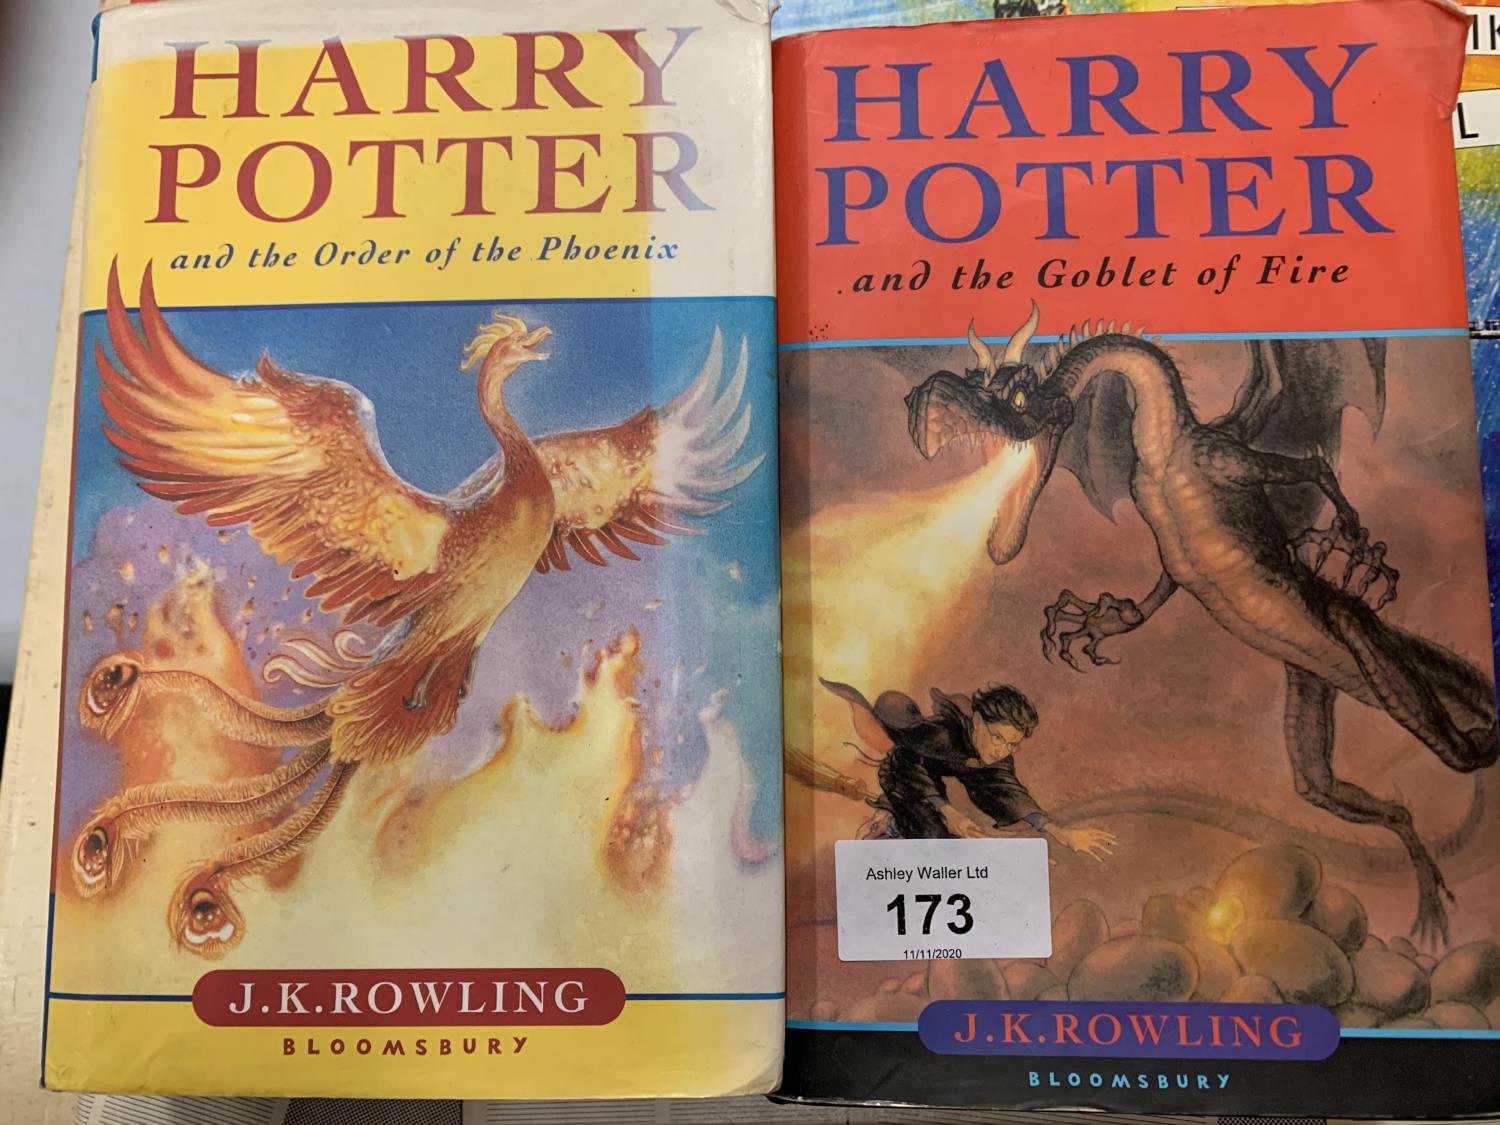 A FIRST EDITION COPY OF J K ROWLING'S 'HARRY POTTER AND THE GOBLET OF FIRE' AND 'THE ORDER OF THE